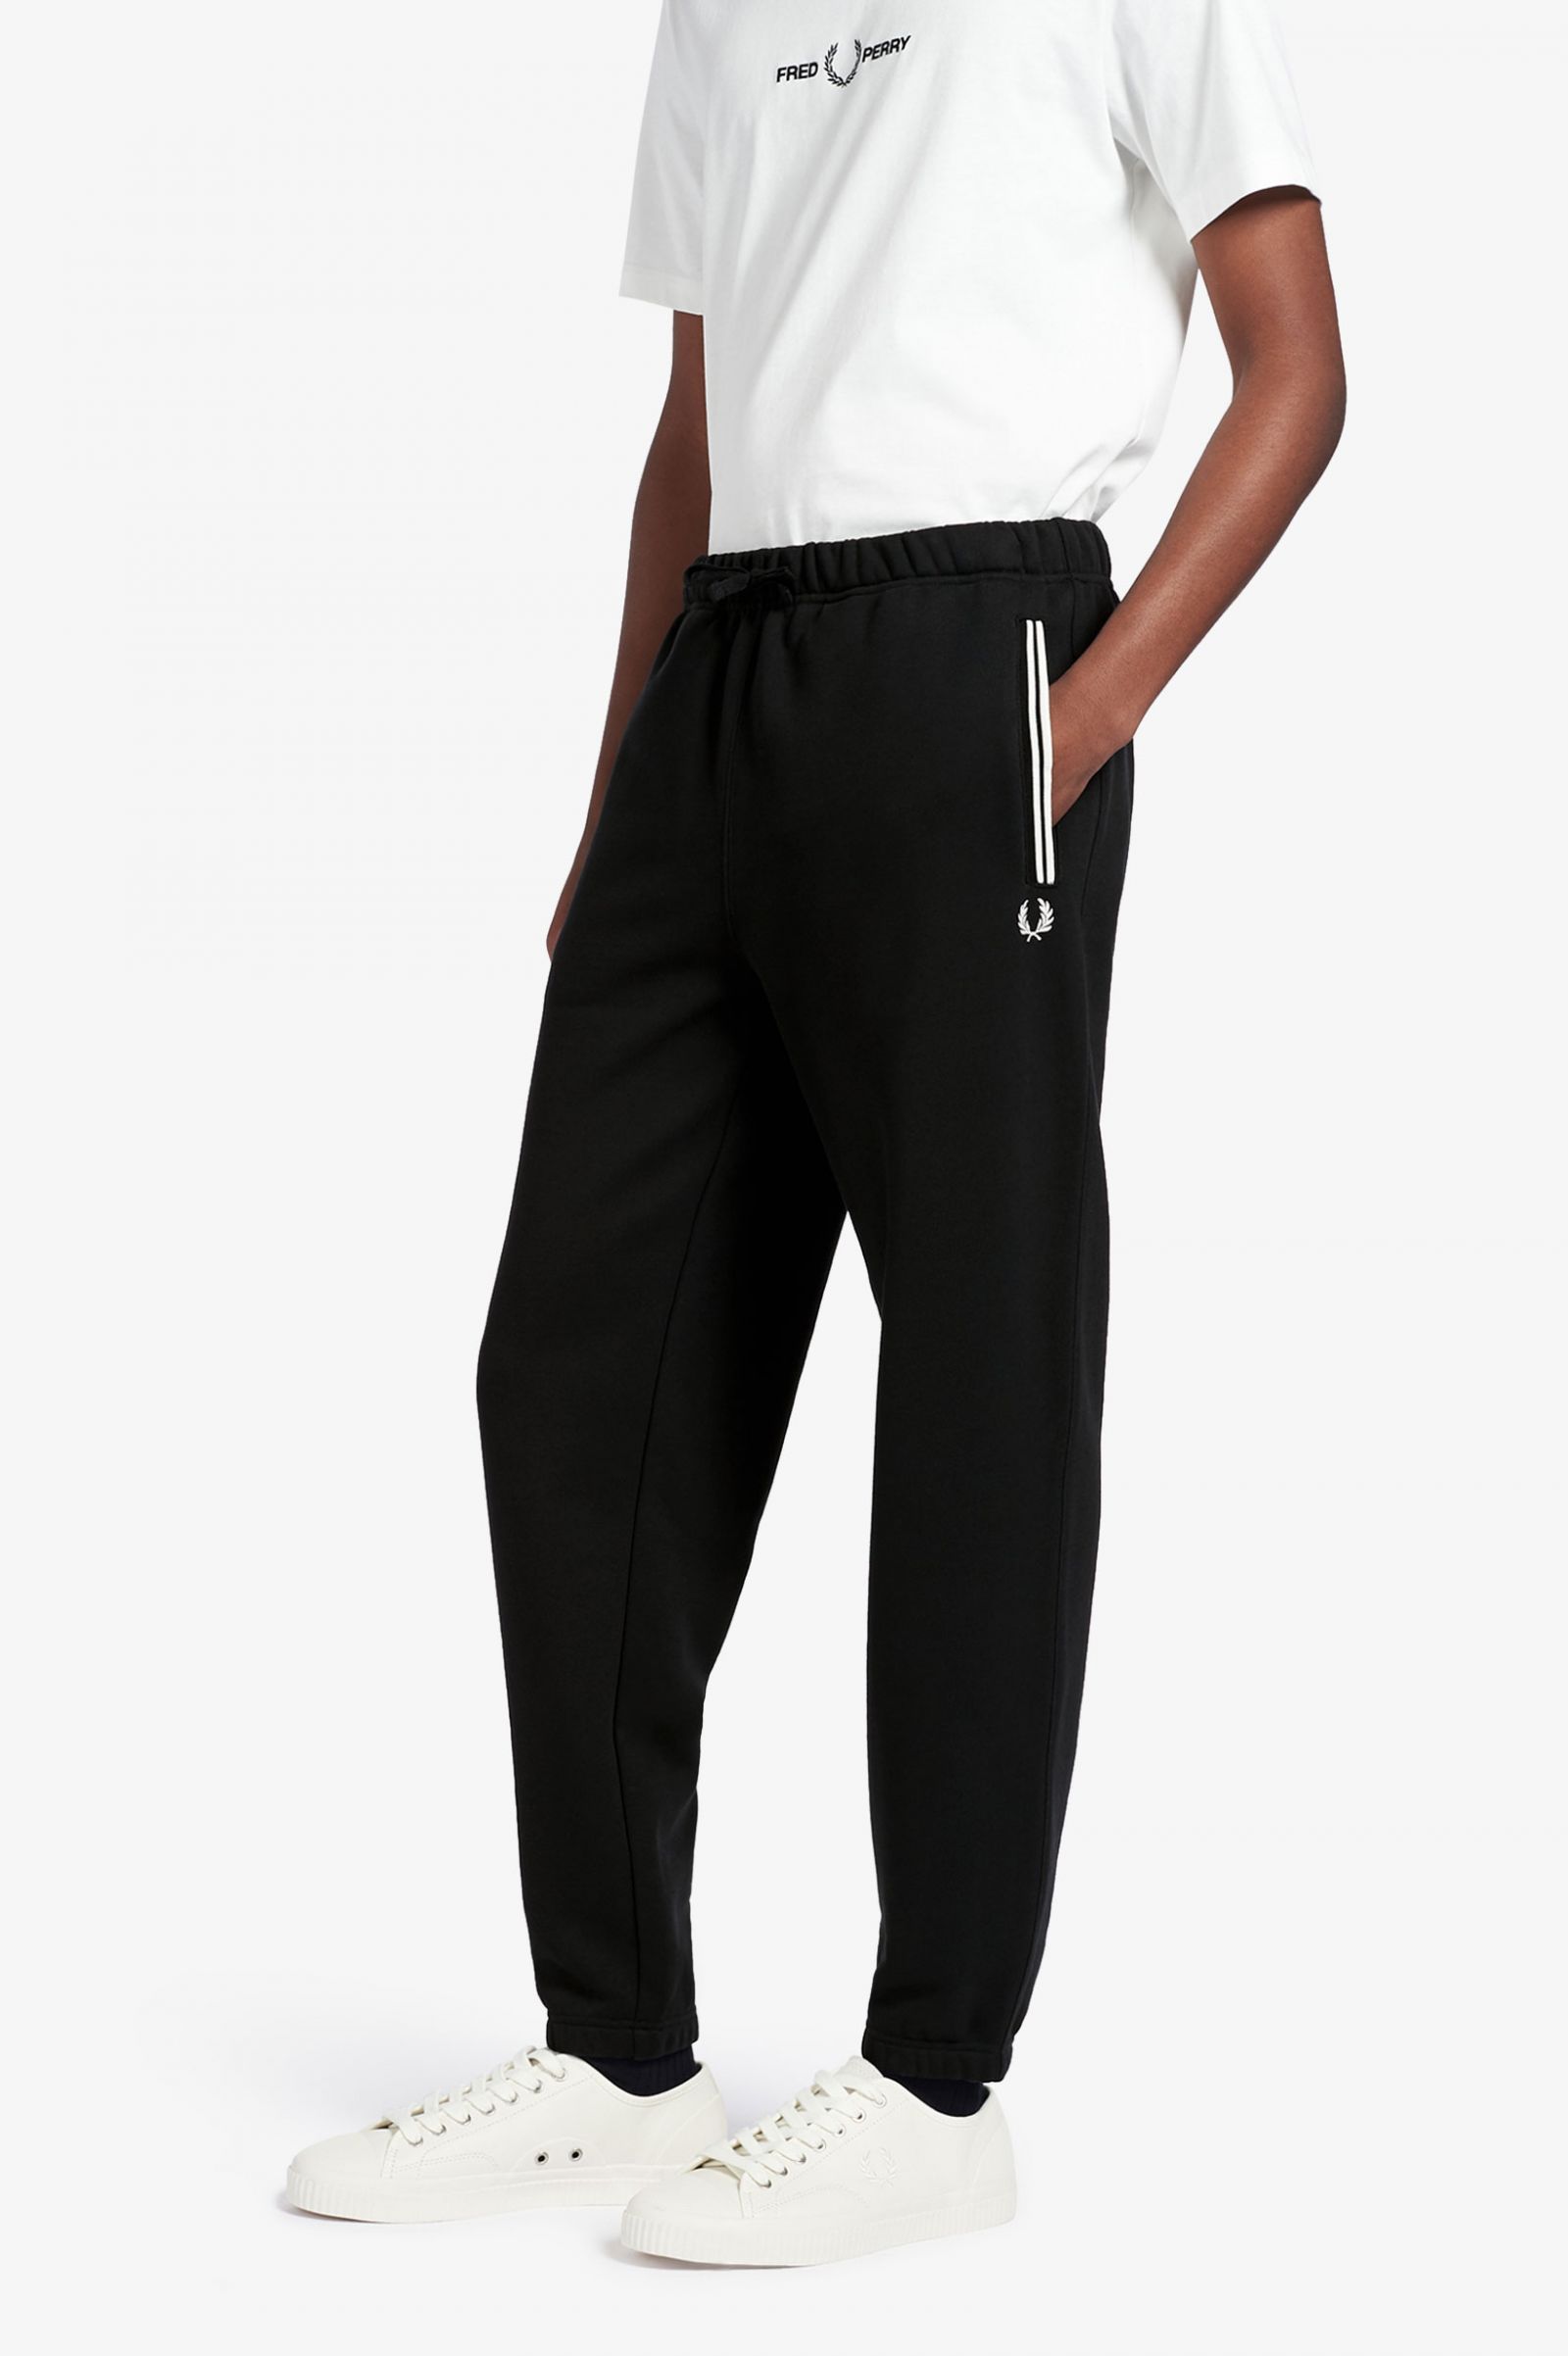 Loopback Sweatpant - Black | Men's Trousers | Chinos, Joggers & Casual ...